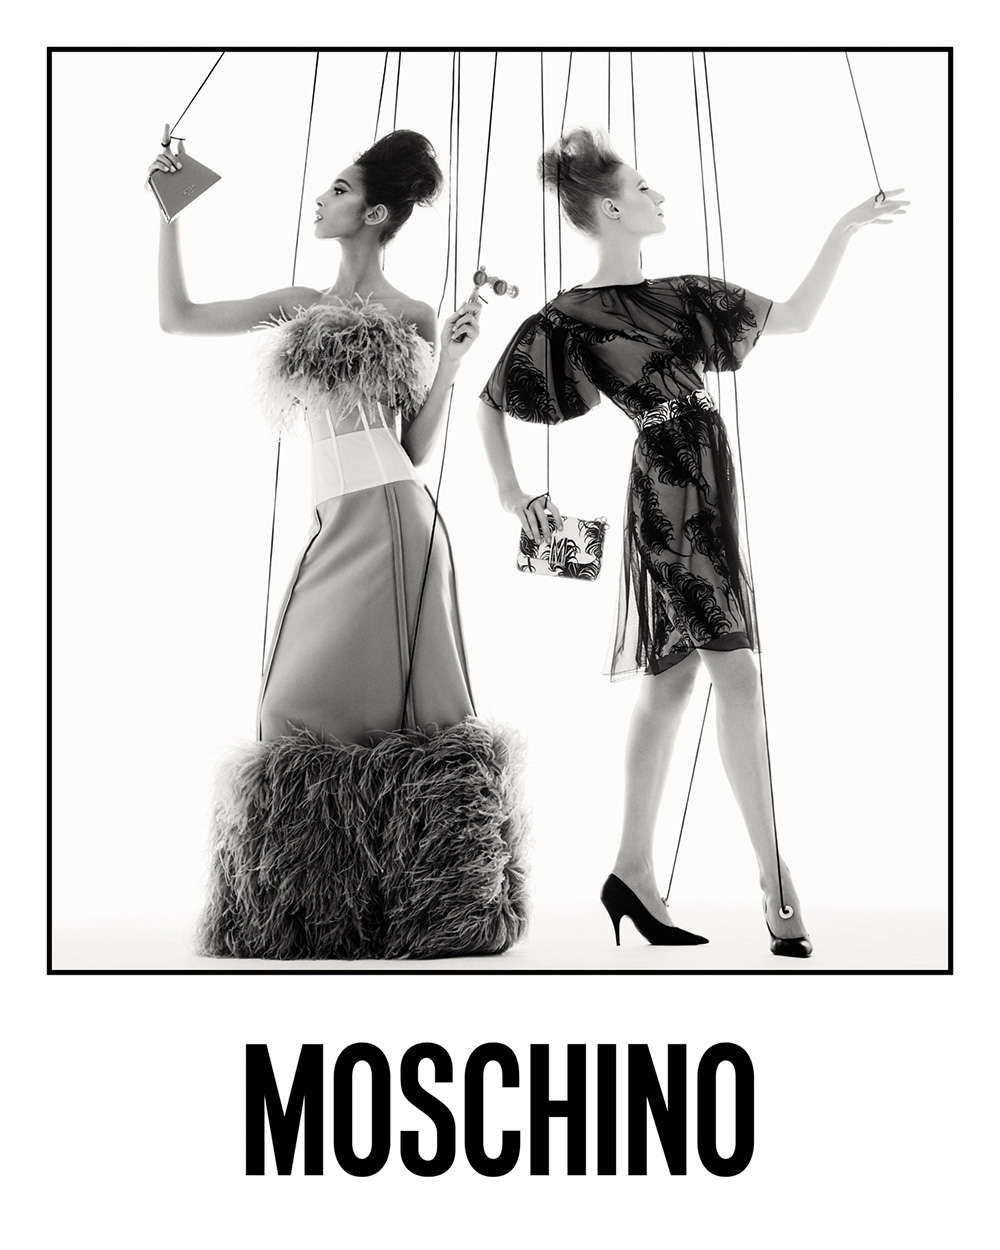 Moschino Spring Summer 2021 Campaign